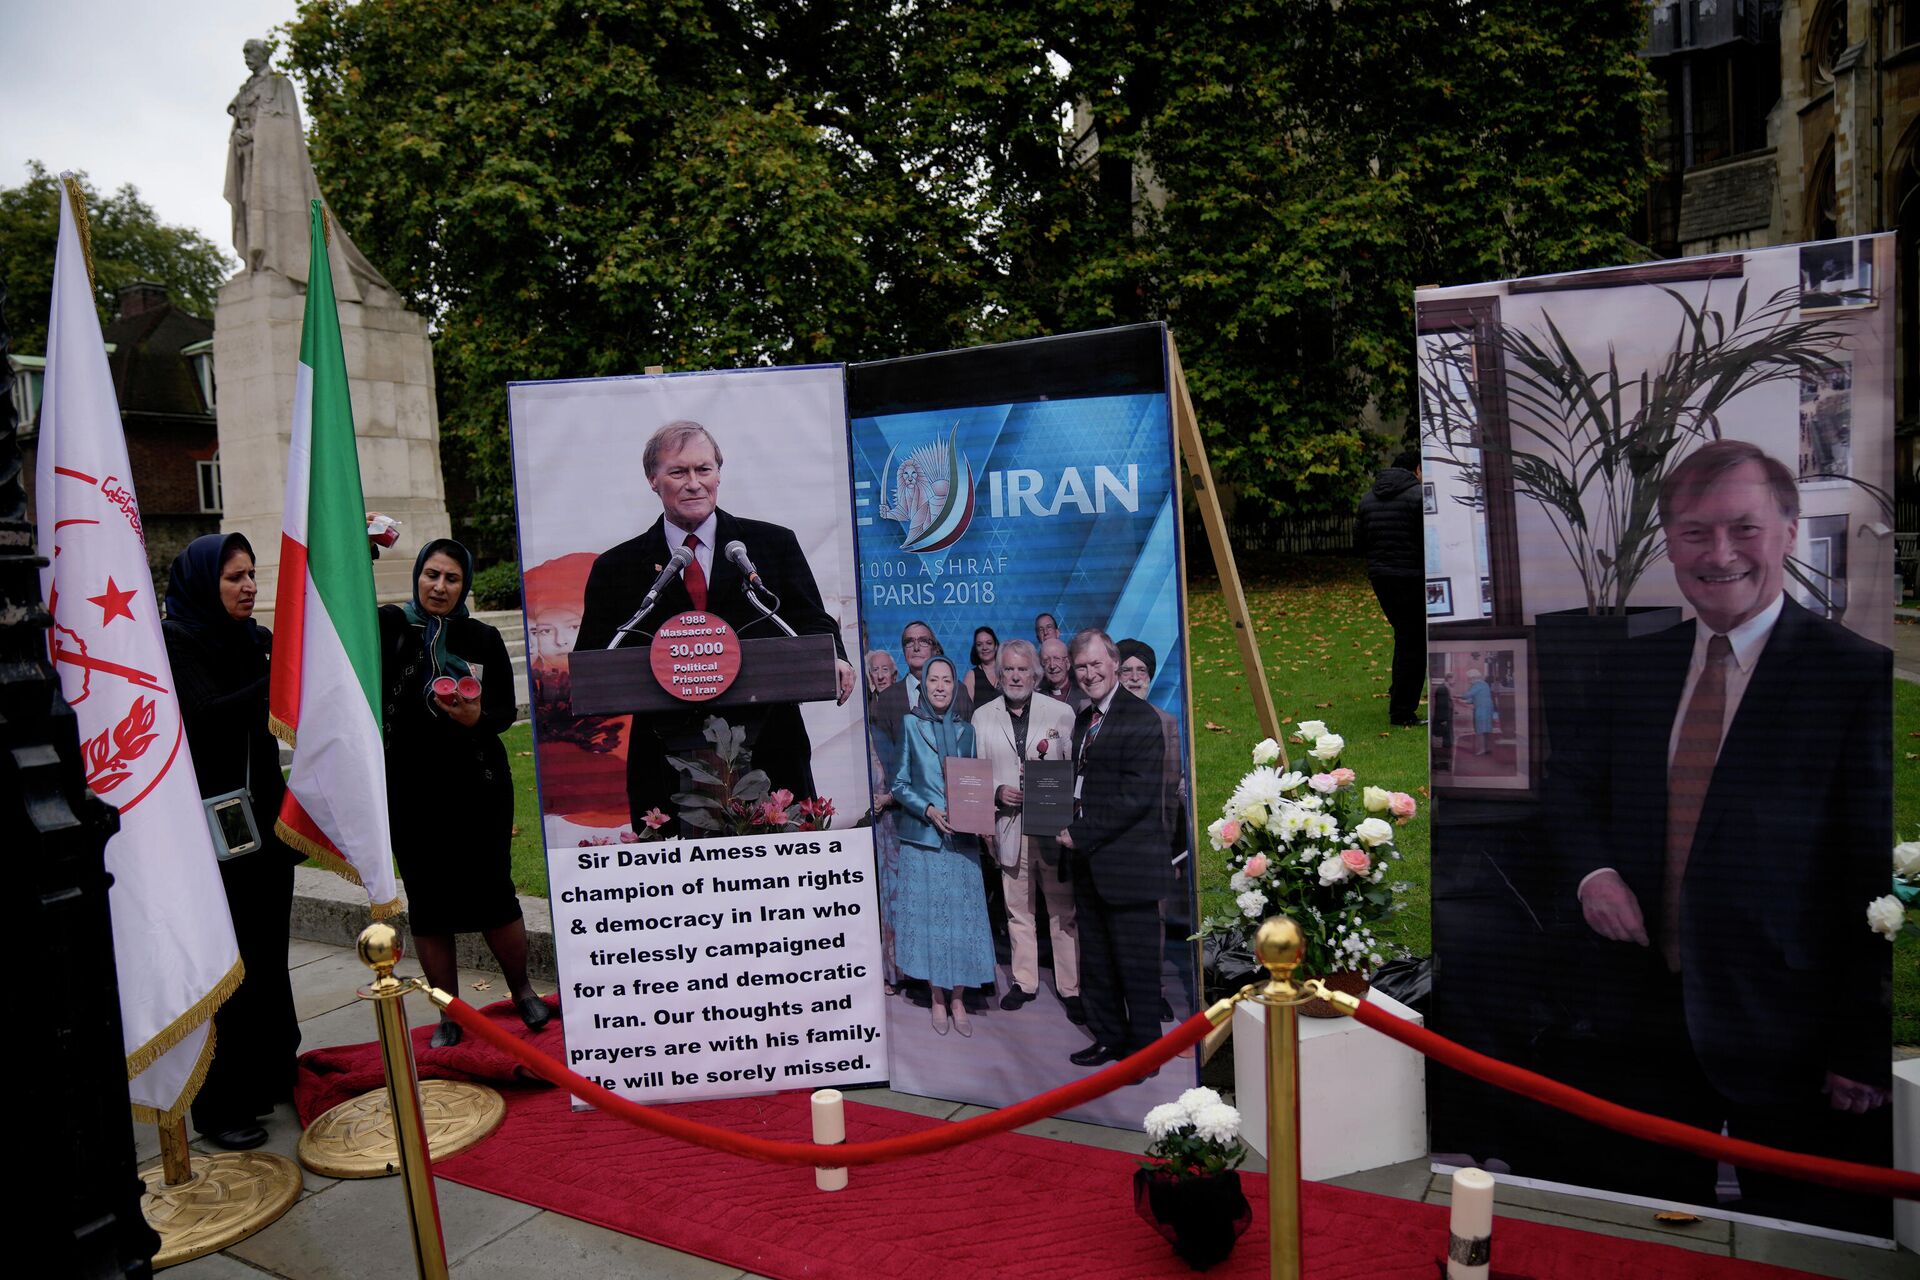 Images of British Member of Parliament David Amess are displayed opposite the Houses of Parliament in London, placed there as a memorial by supporters of the National Council of Resistance of Iran (NCRI), Monday, Oct. 18, 2021 - Sputnik International, 1920, 03.12.2021